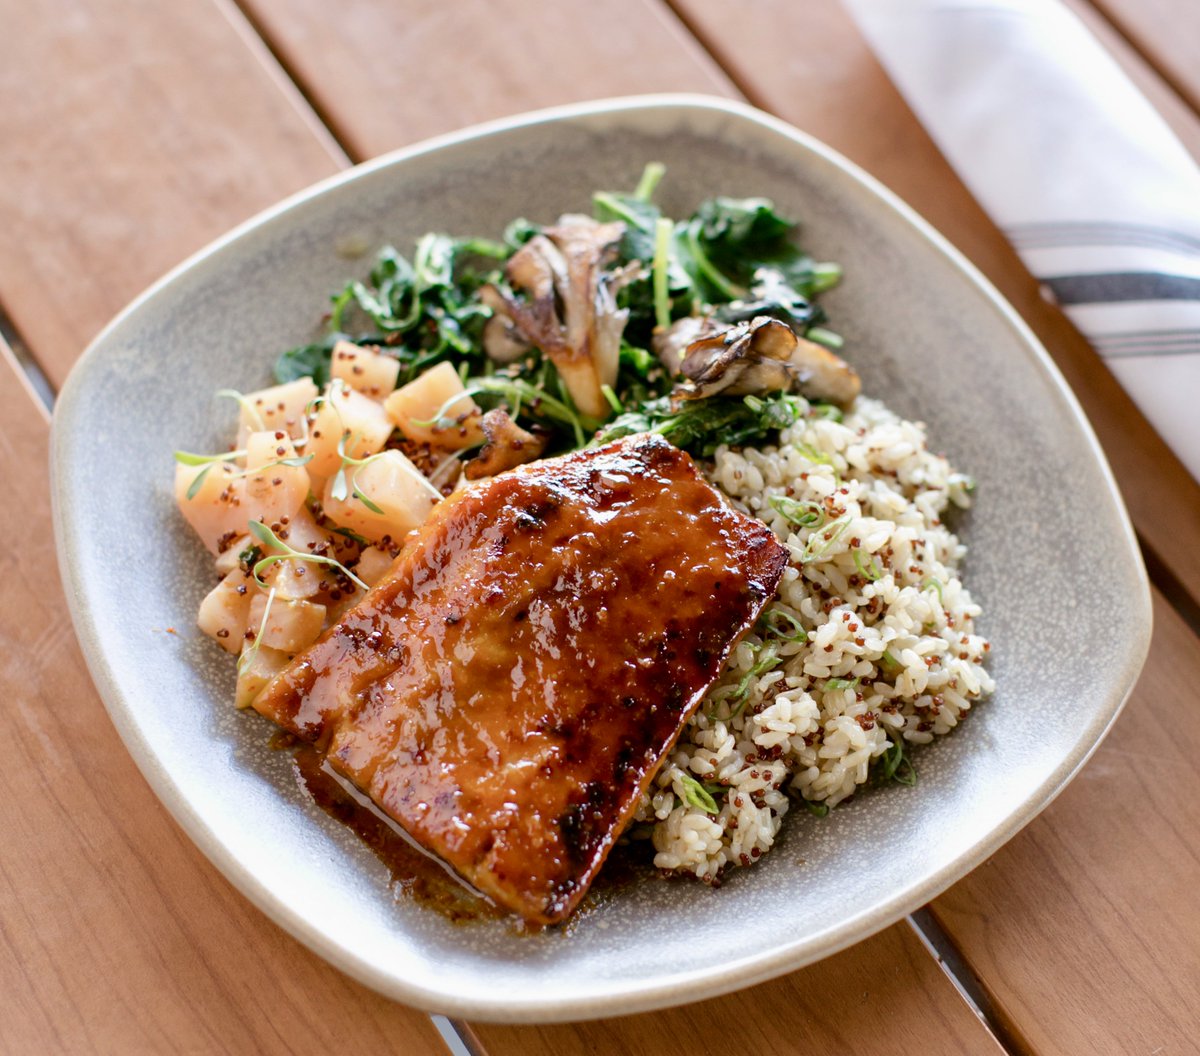 Local, wild and sustainable Black Cod. Miso-glazed, served with garlic-ginger brown rice quinoa blend, beet 'poke', sautéed baby kale and maitake mushrooms.  #seafoodlover #sourcelocal #wavetotable #sustainableseafood #sfbay #wintermenu #pacificcatch #westcoaststyle